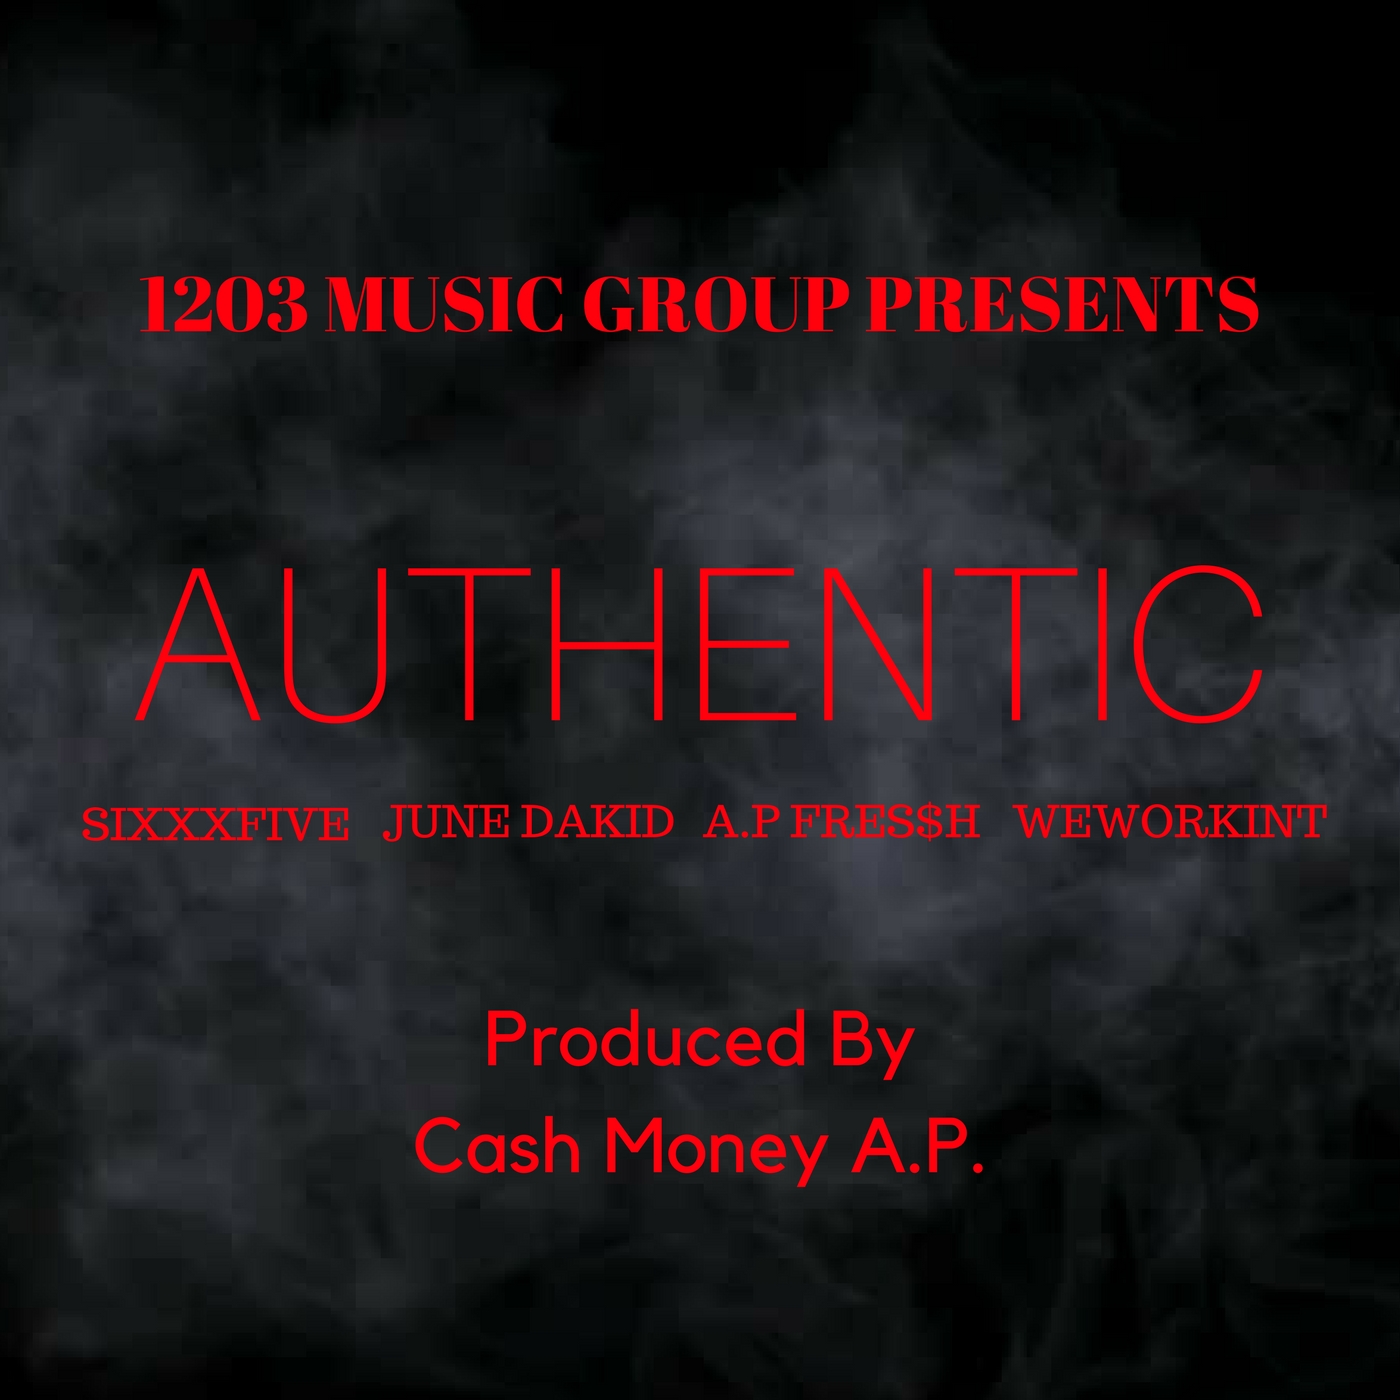 Authentic Featuring Sixxxfive June Dakid A.P Fres$h and WeworkinT